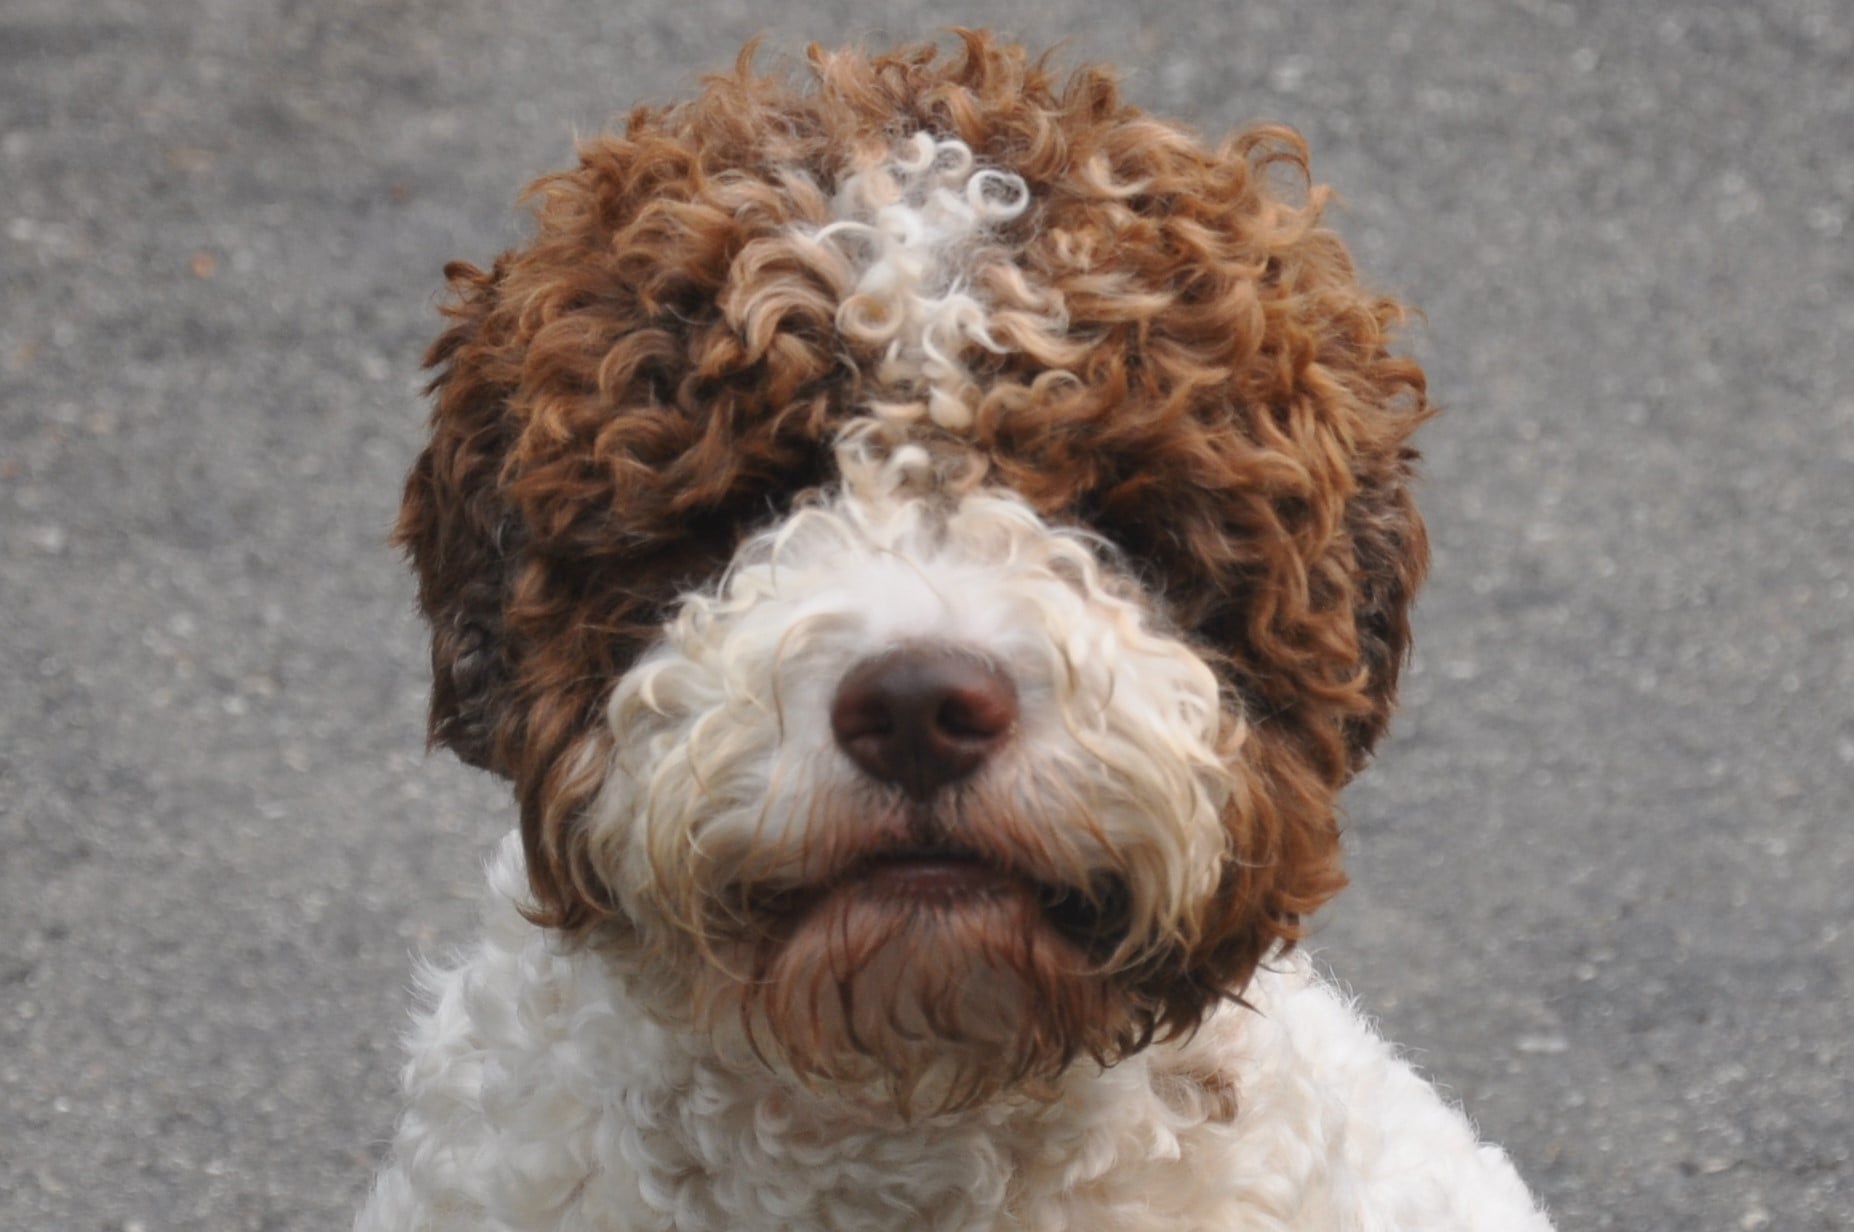 Lagotto Romagnolo Dog with Curly Face